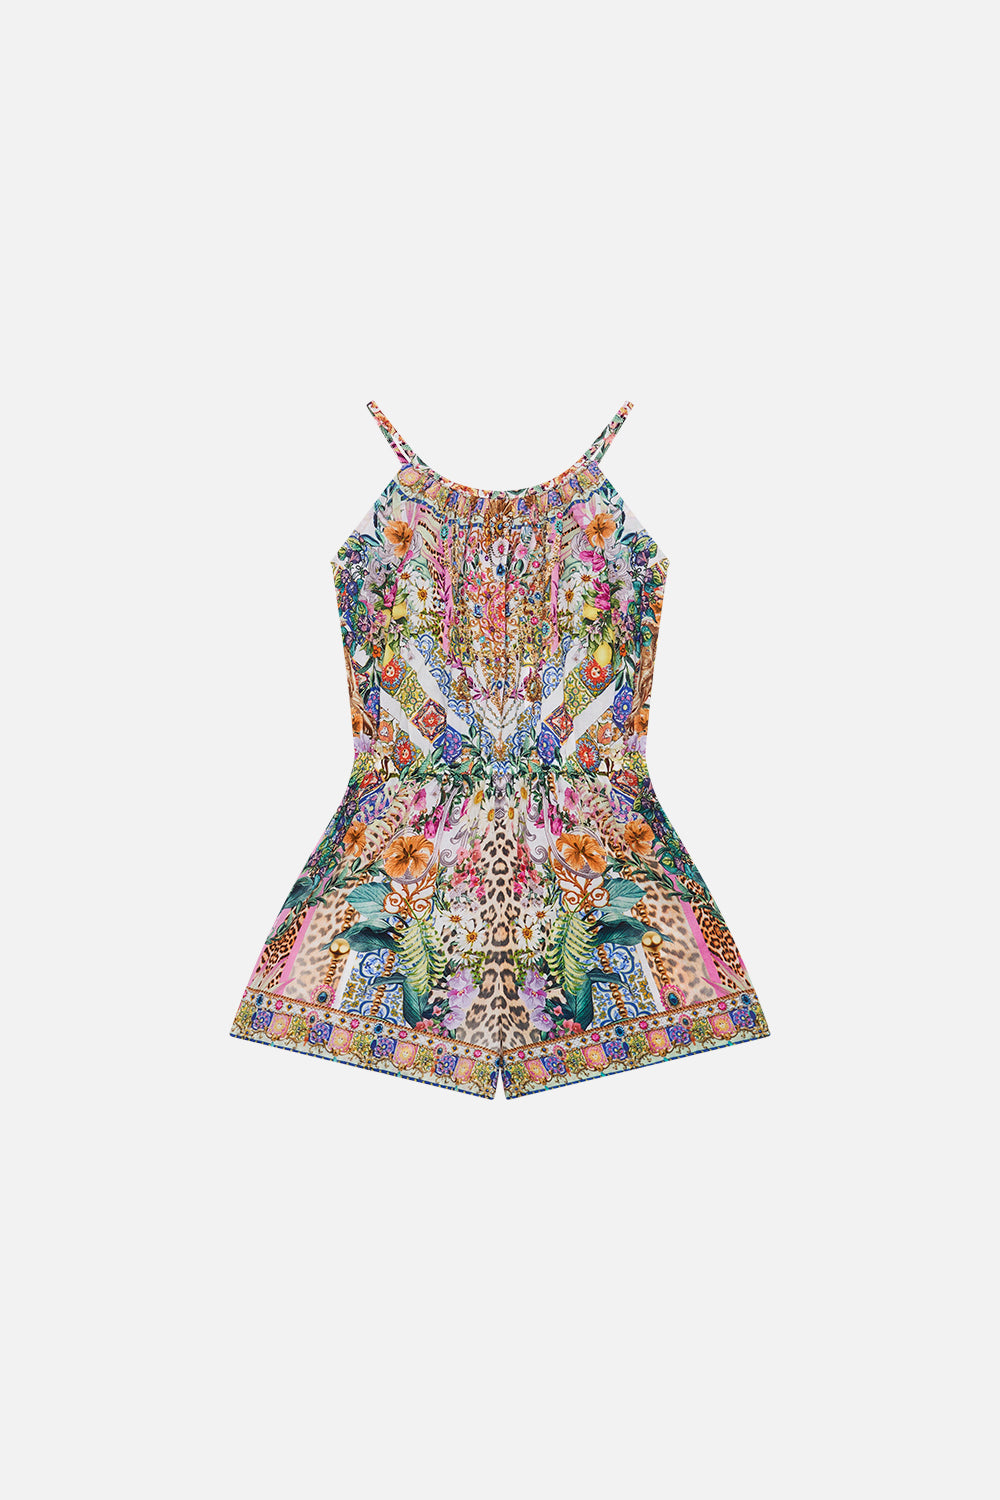 Milla by CAMILLA floral playsuit in Flowers Of Neptune print